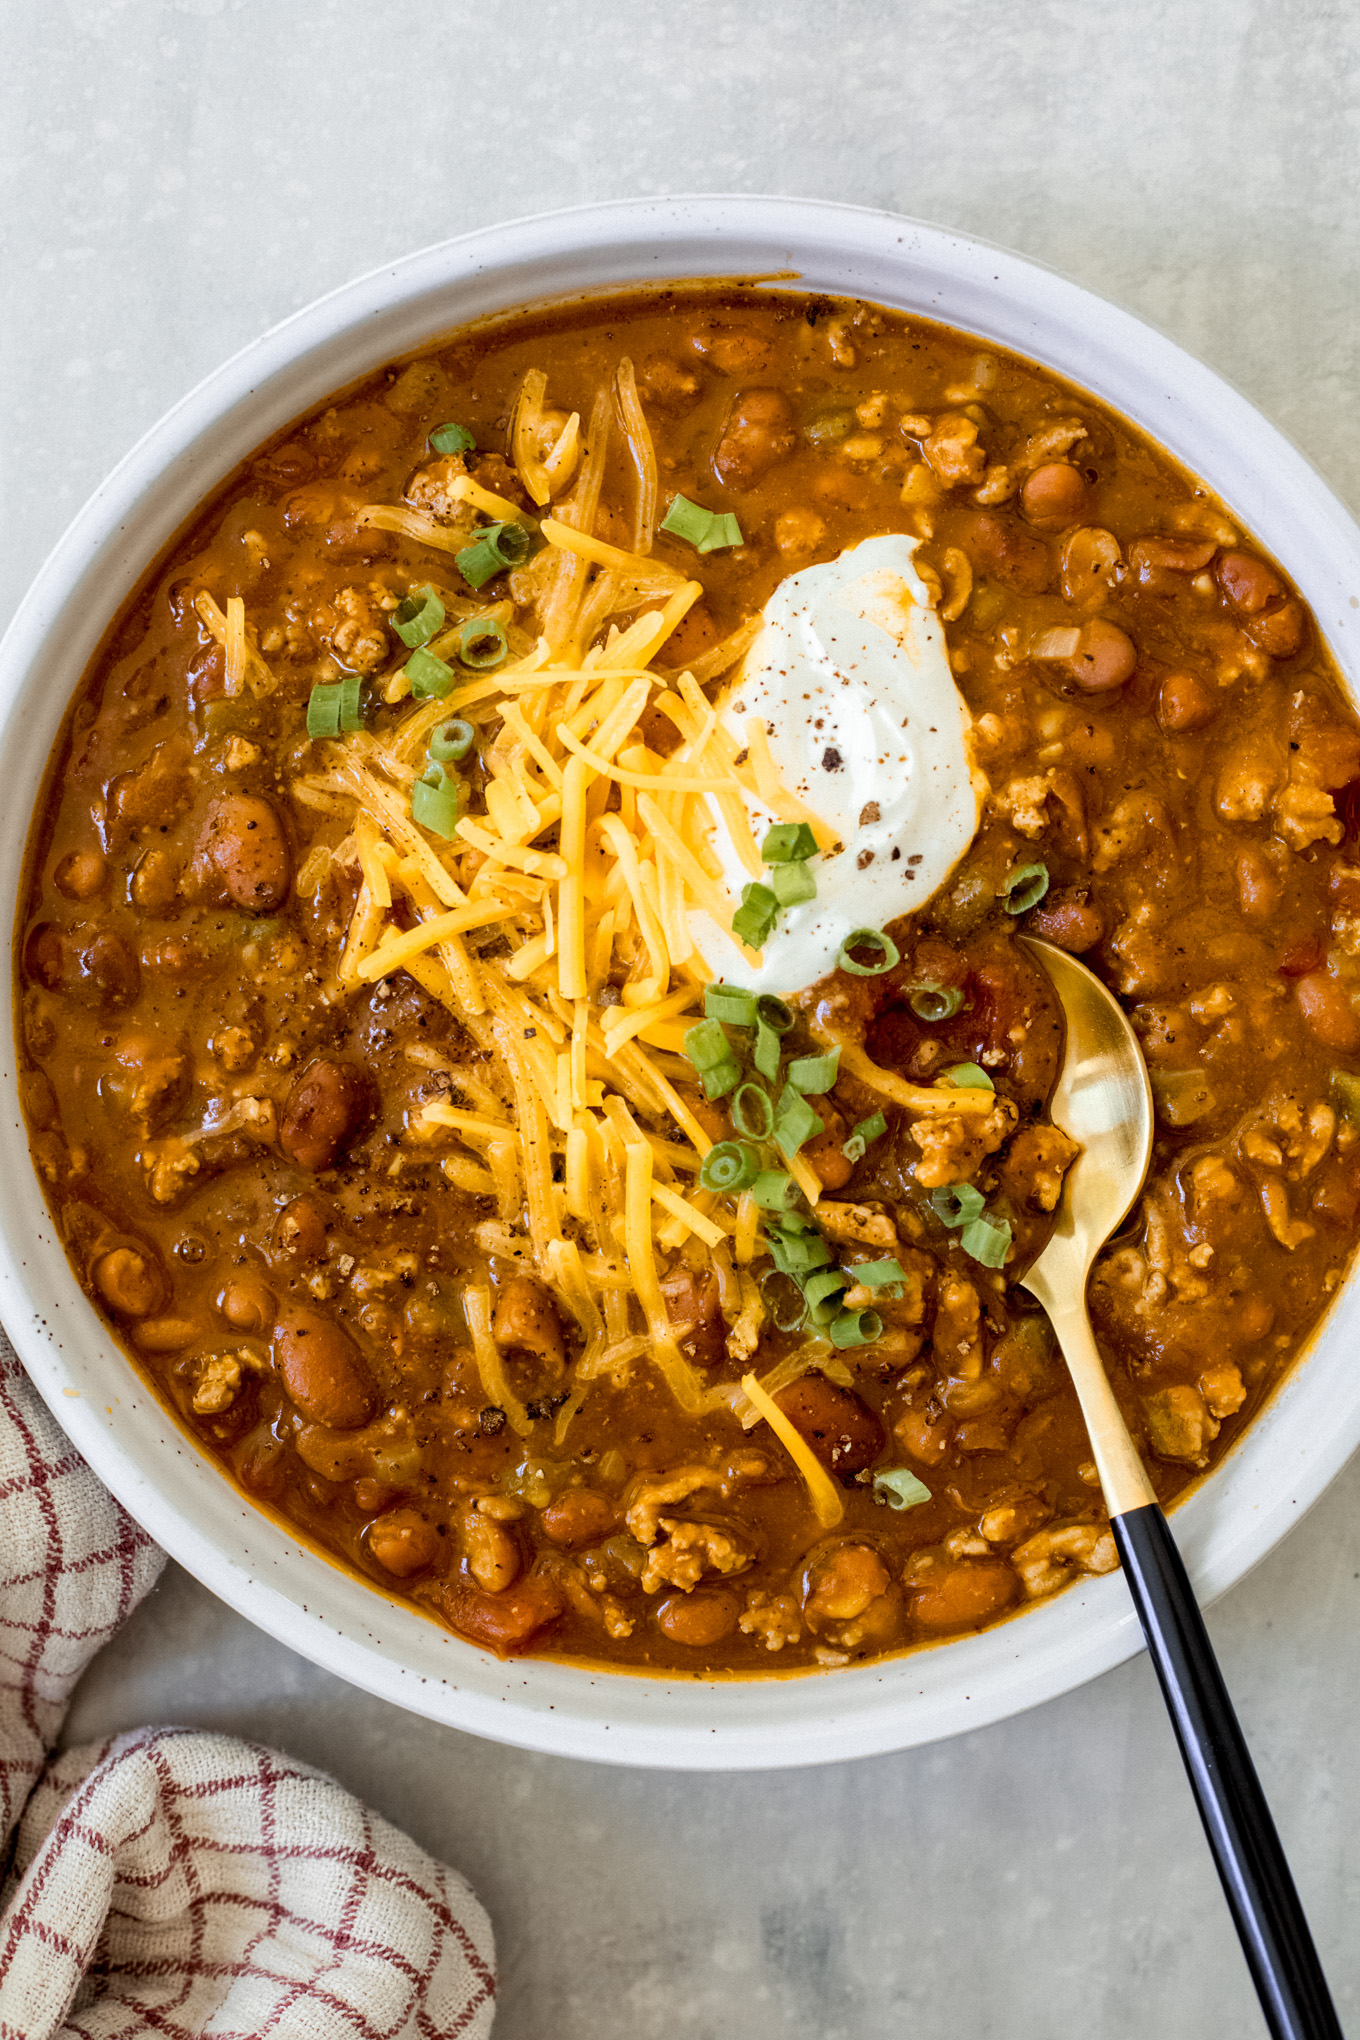 turkey pumpkin chili in a bowl with cheese and green onions.